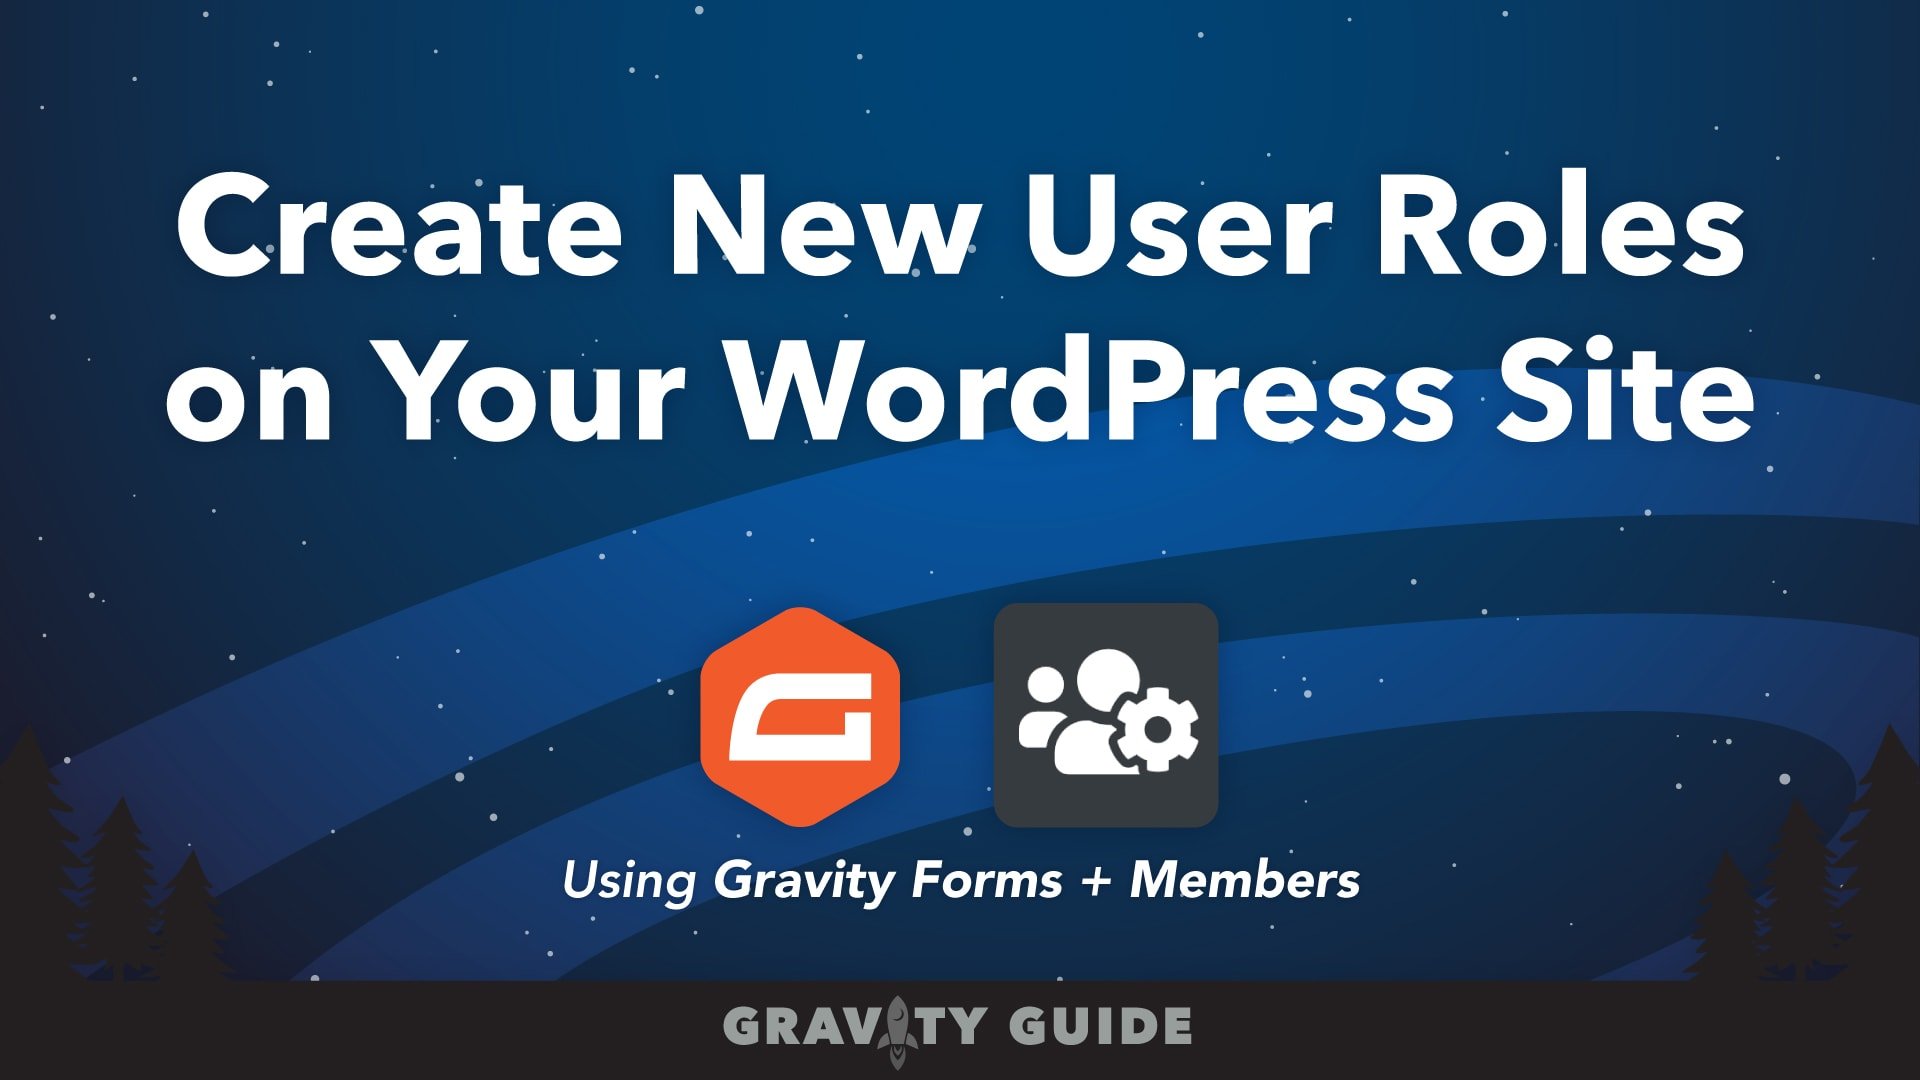 Create New User Roles on Your WordPress Site